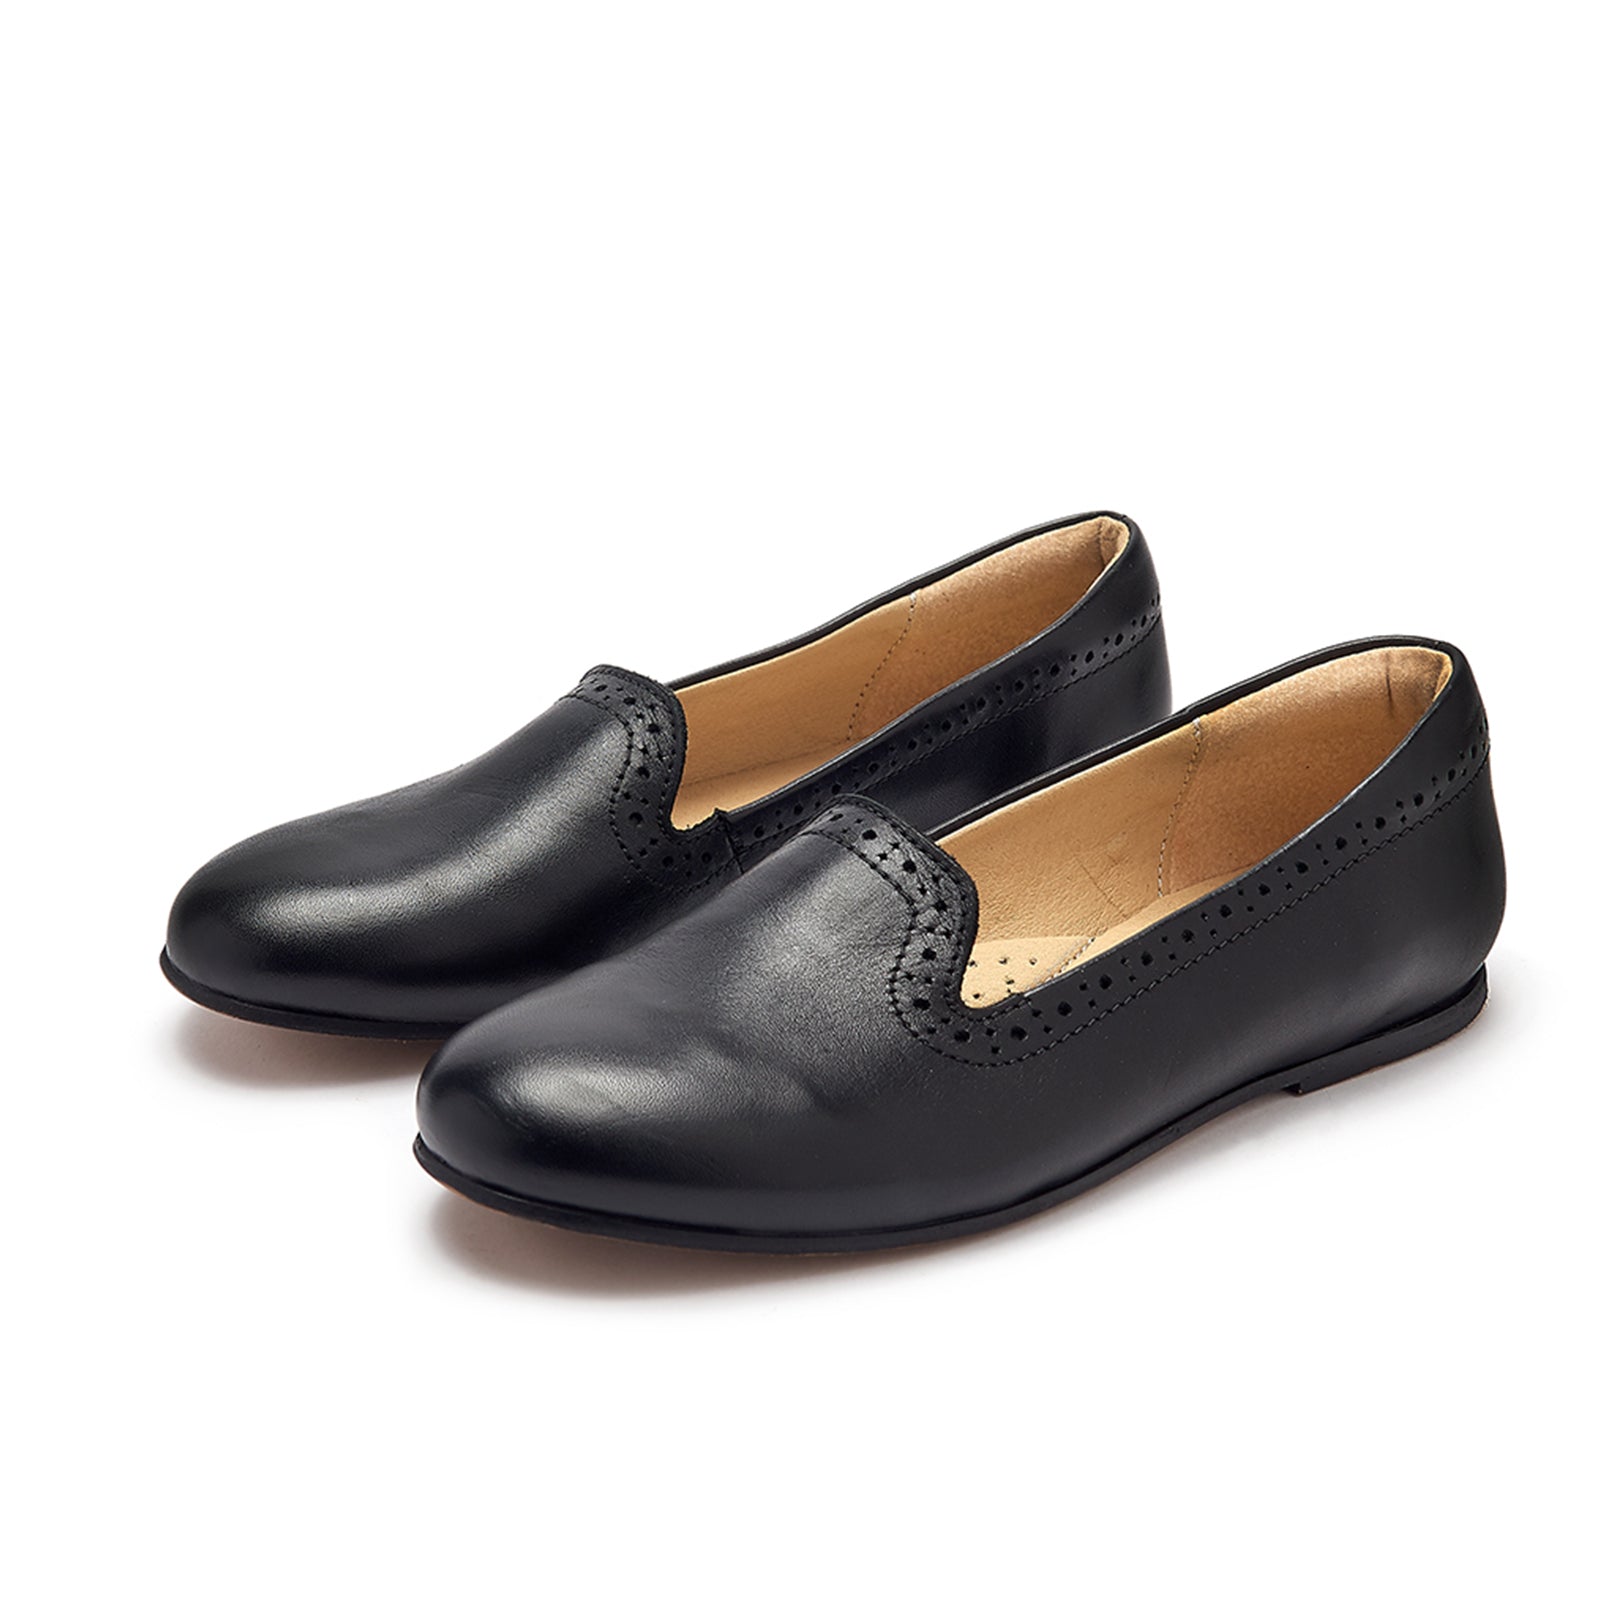 Young Soles Sindy Black Leather Slipper Shoes